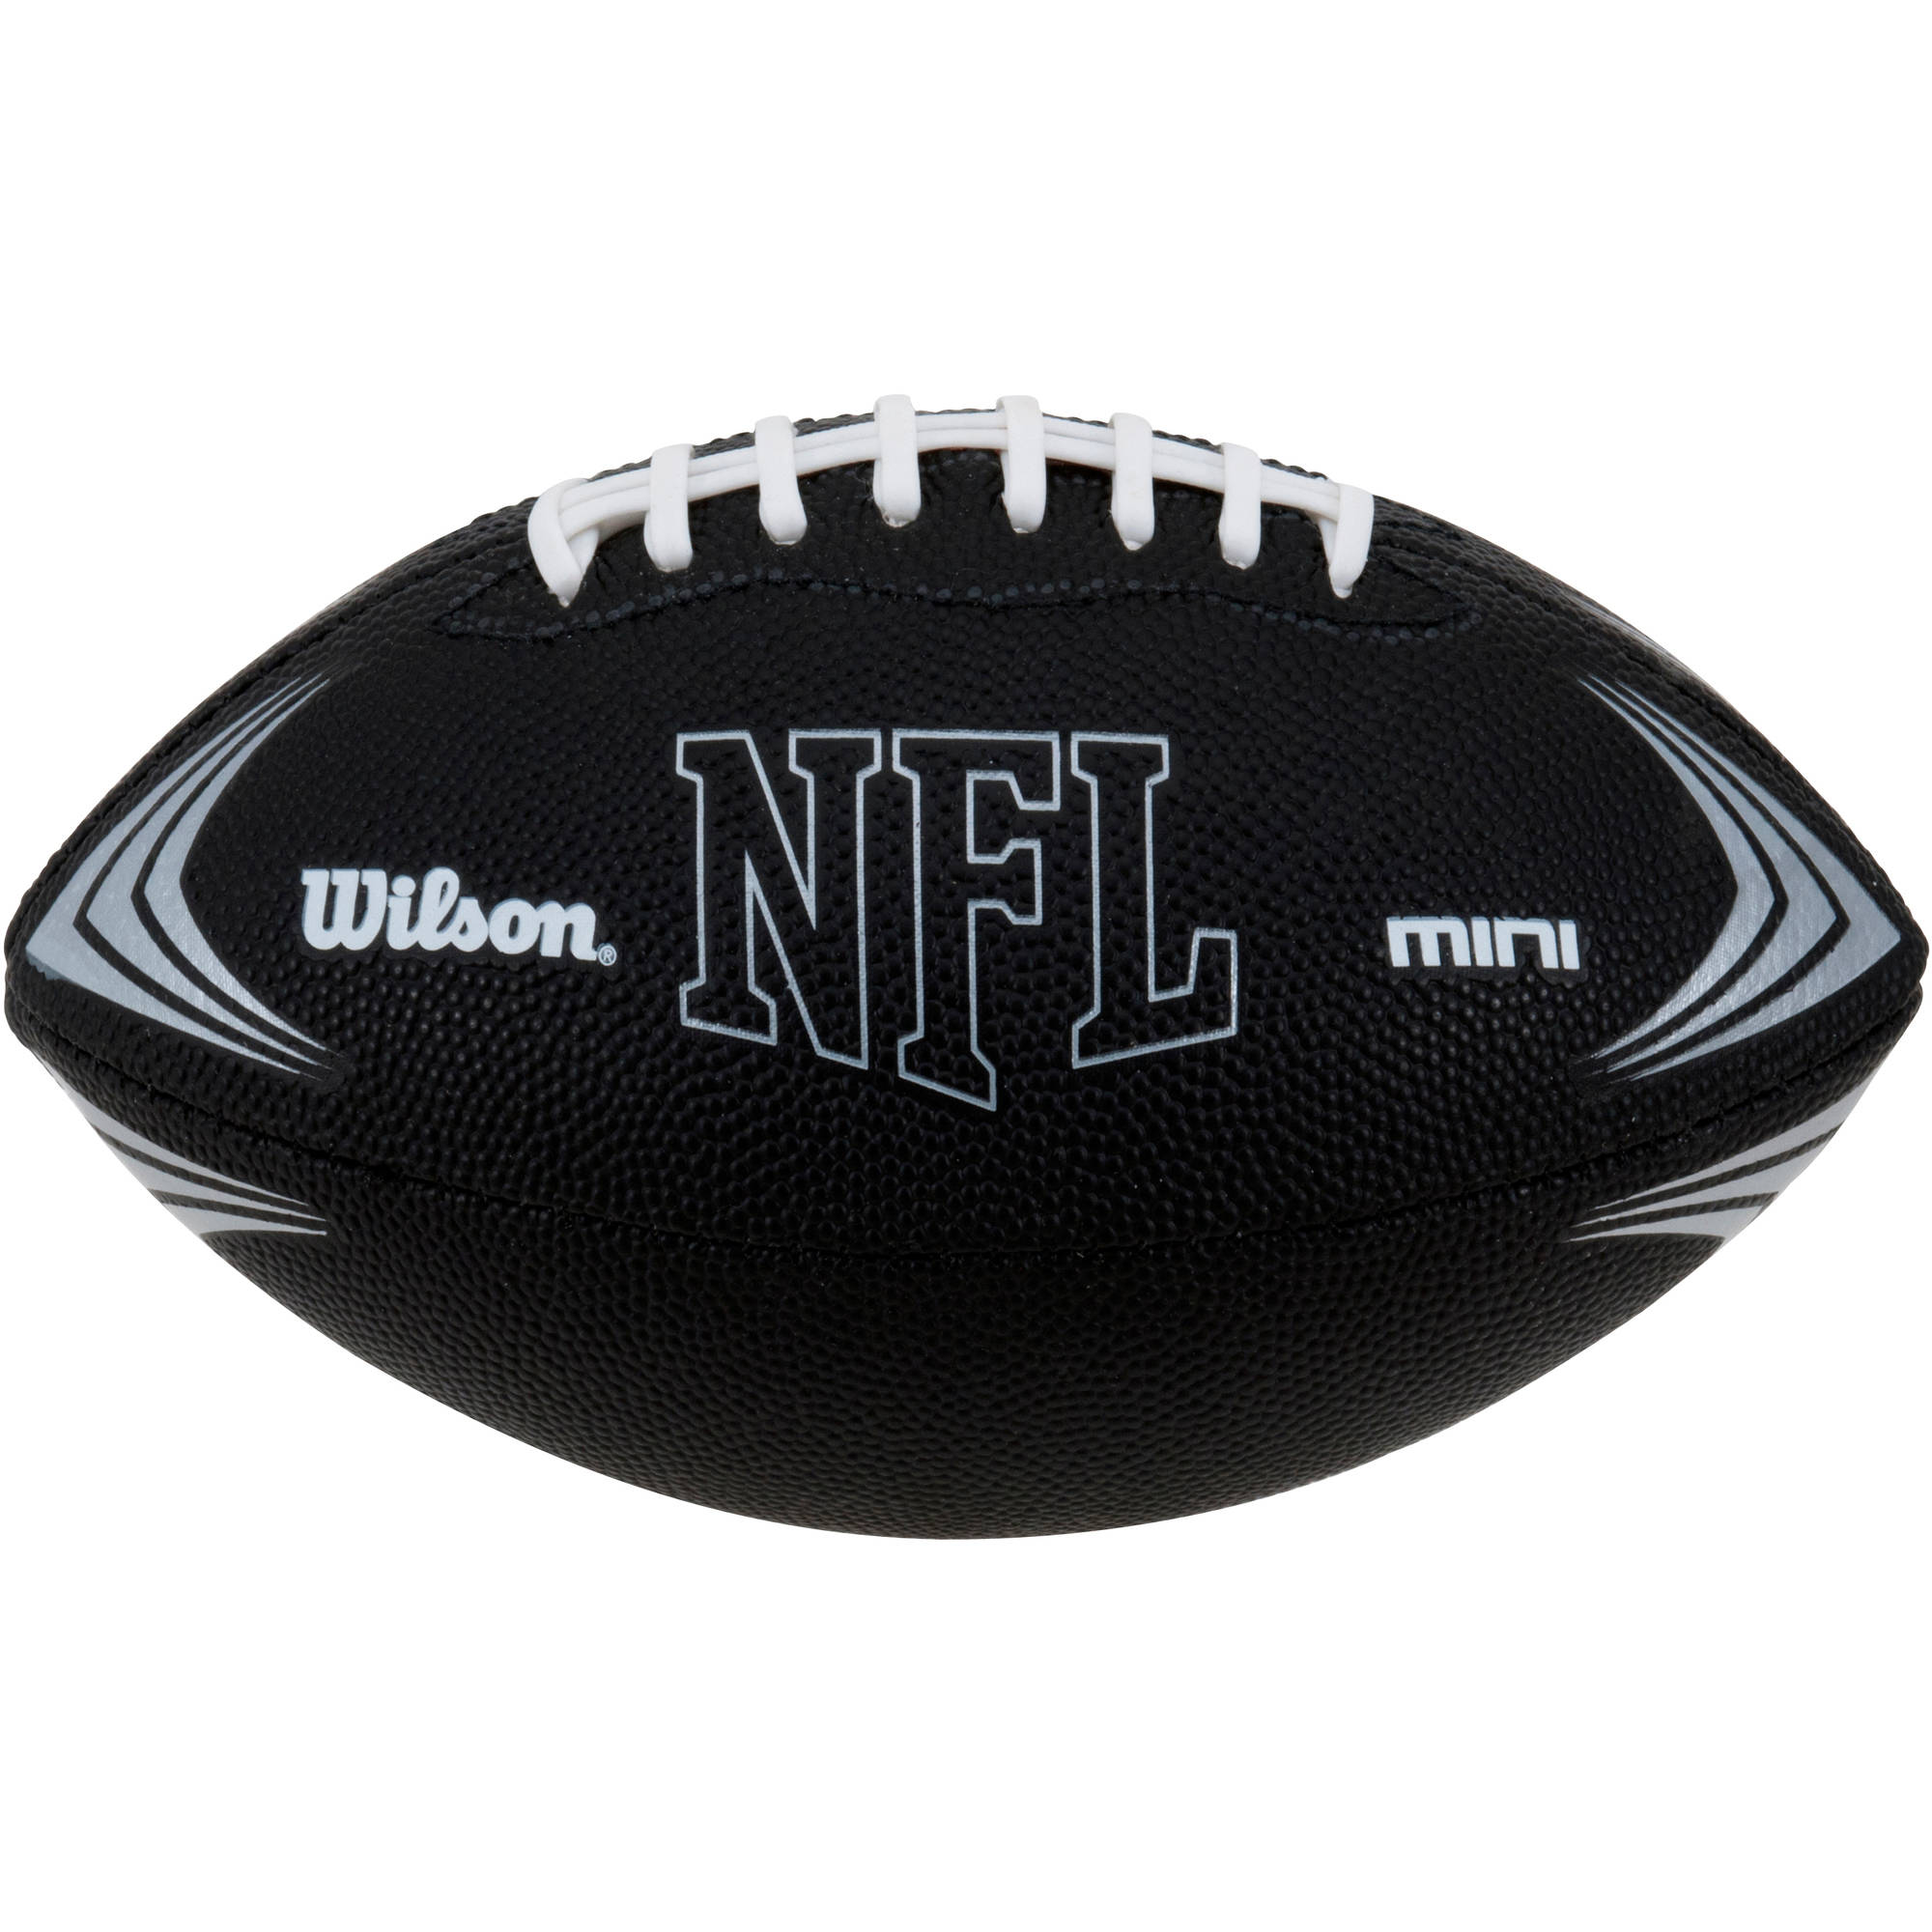 Wilson Sporting Goods NFL Mini Rubber Youth Football, Black - image 2 of 3